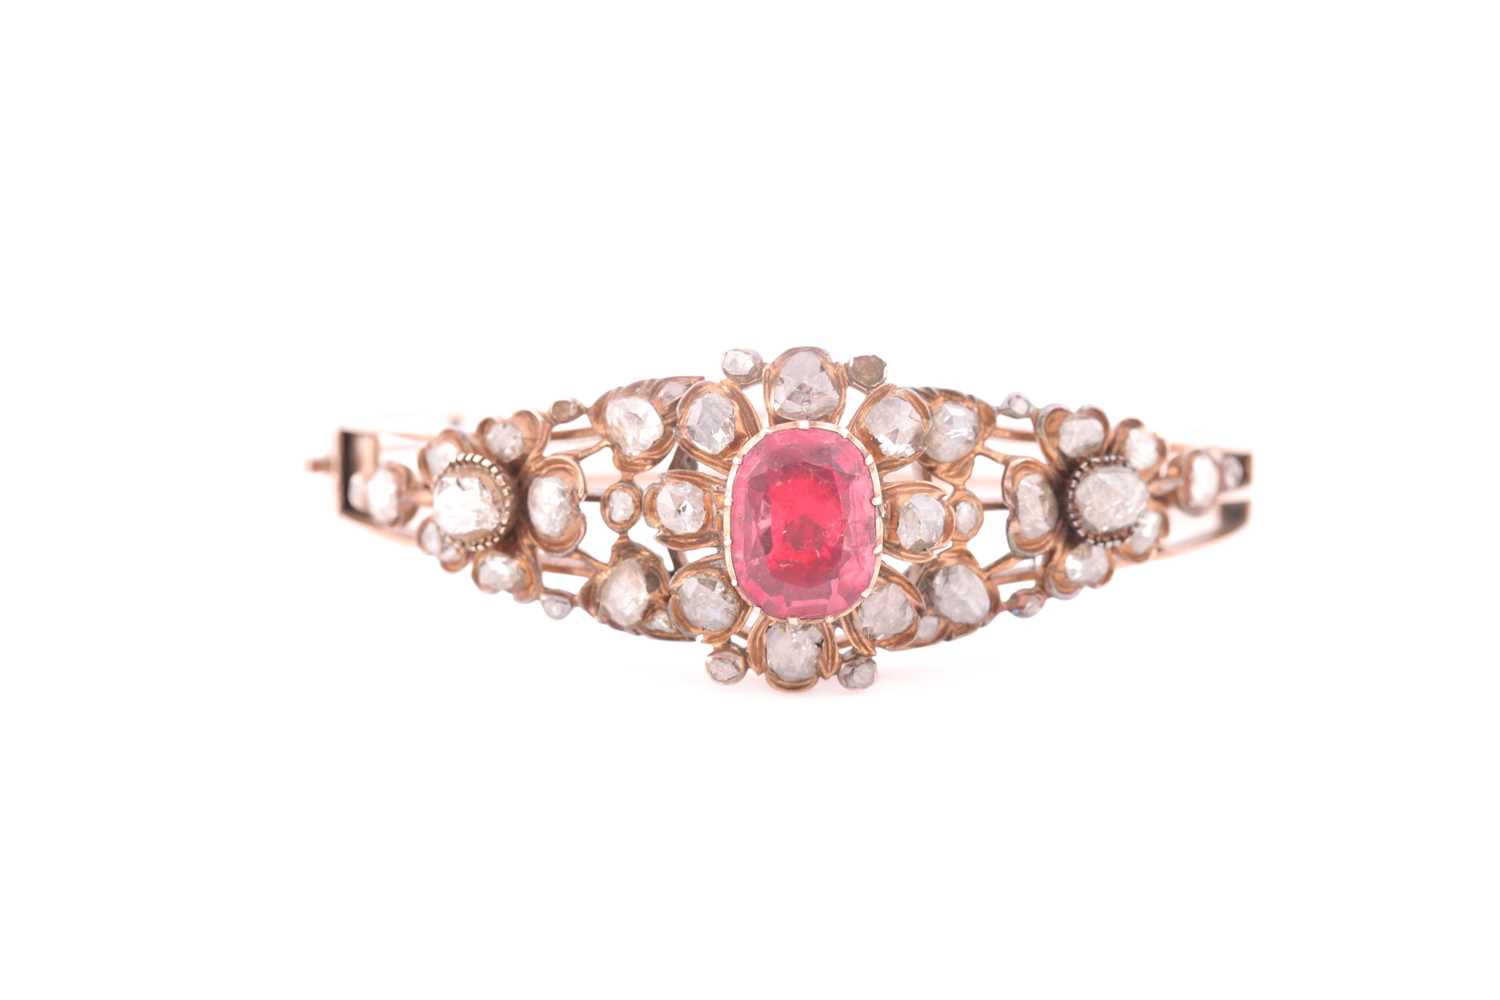 An antique yellow metal and diamond bangle, set with a reddish pink central stone, likely spinel, - Image 2 of 6